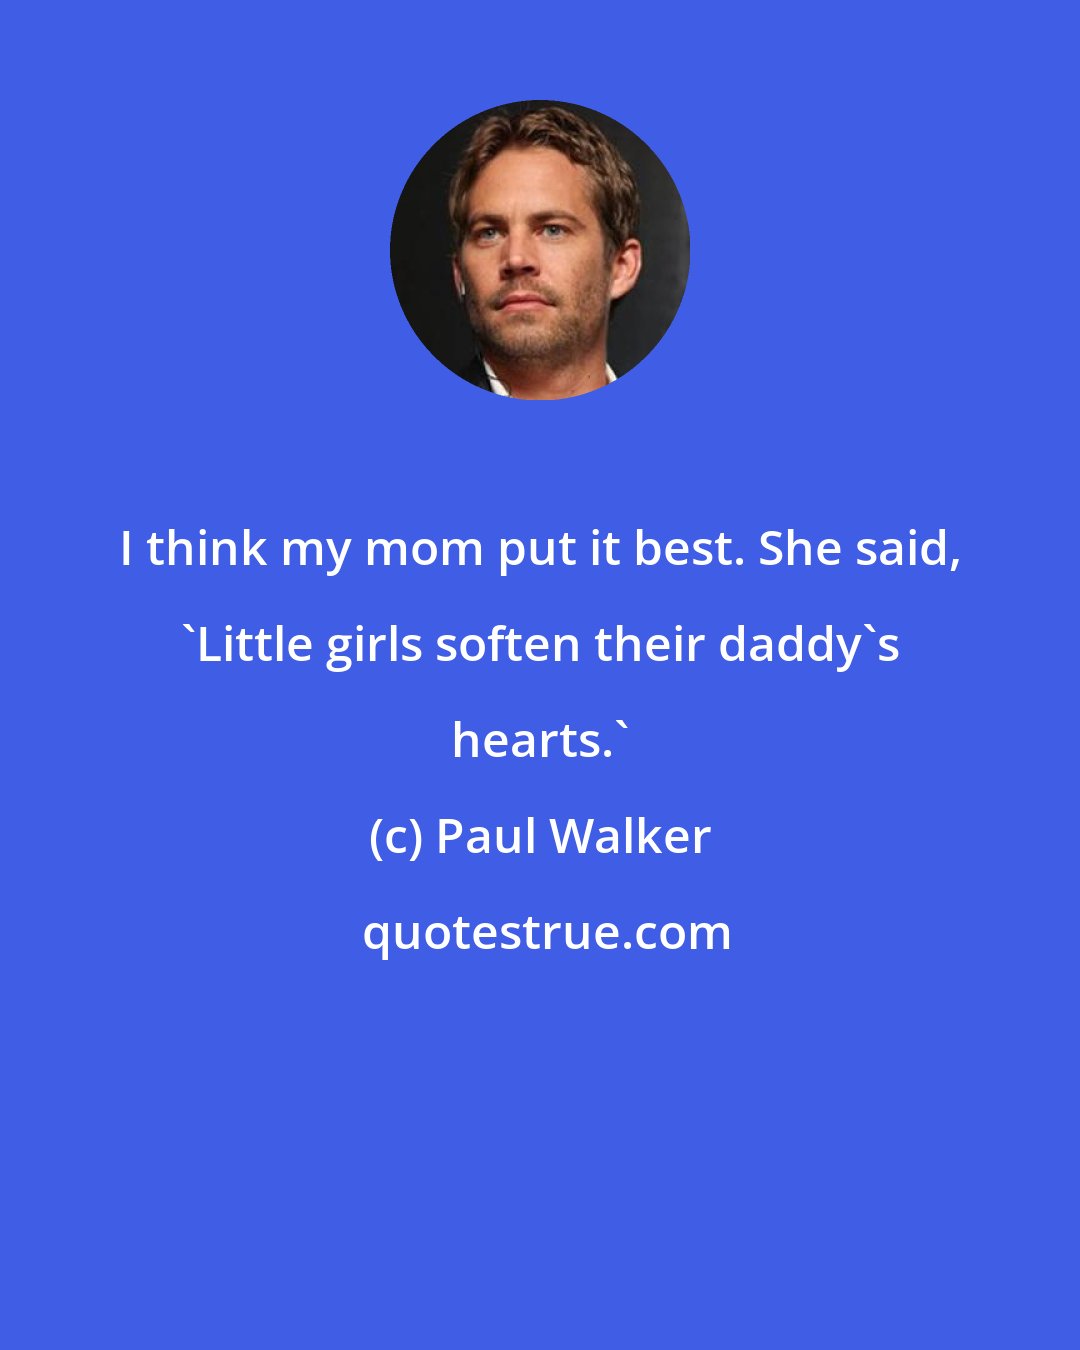 Paul Walker: I think my mom put it best. She said, 'Little girls soften their daddy's hearts.'